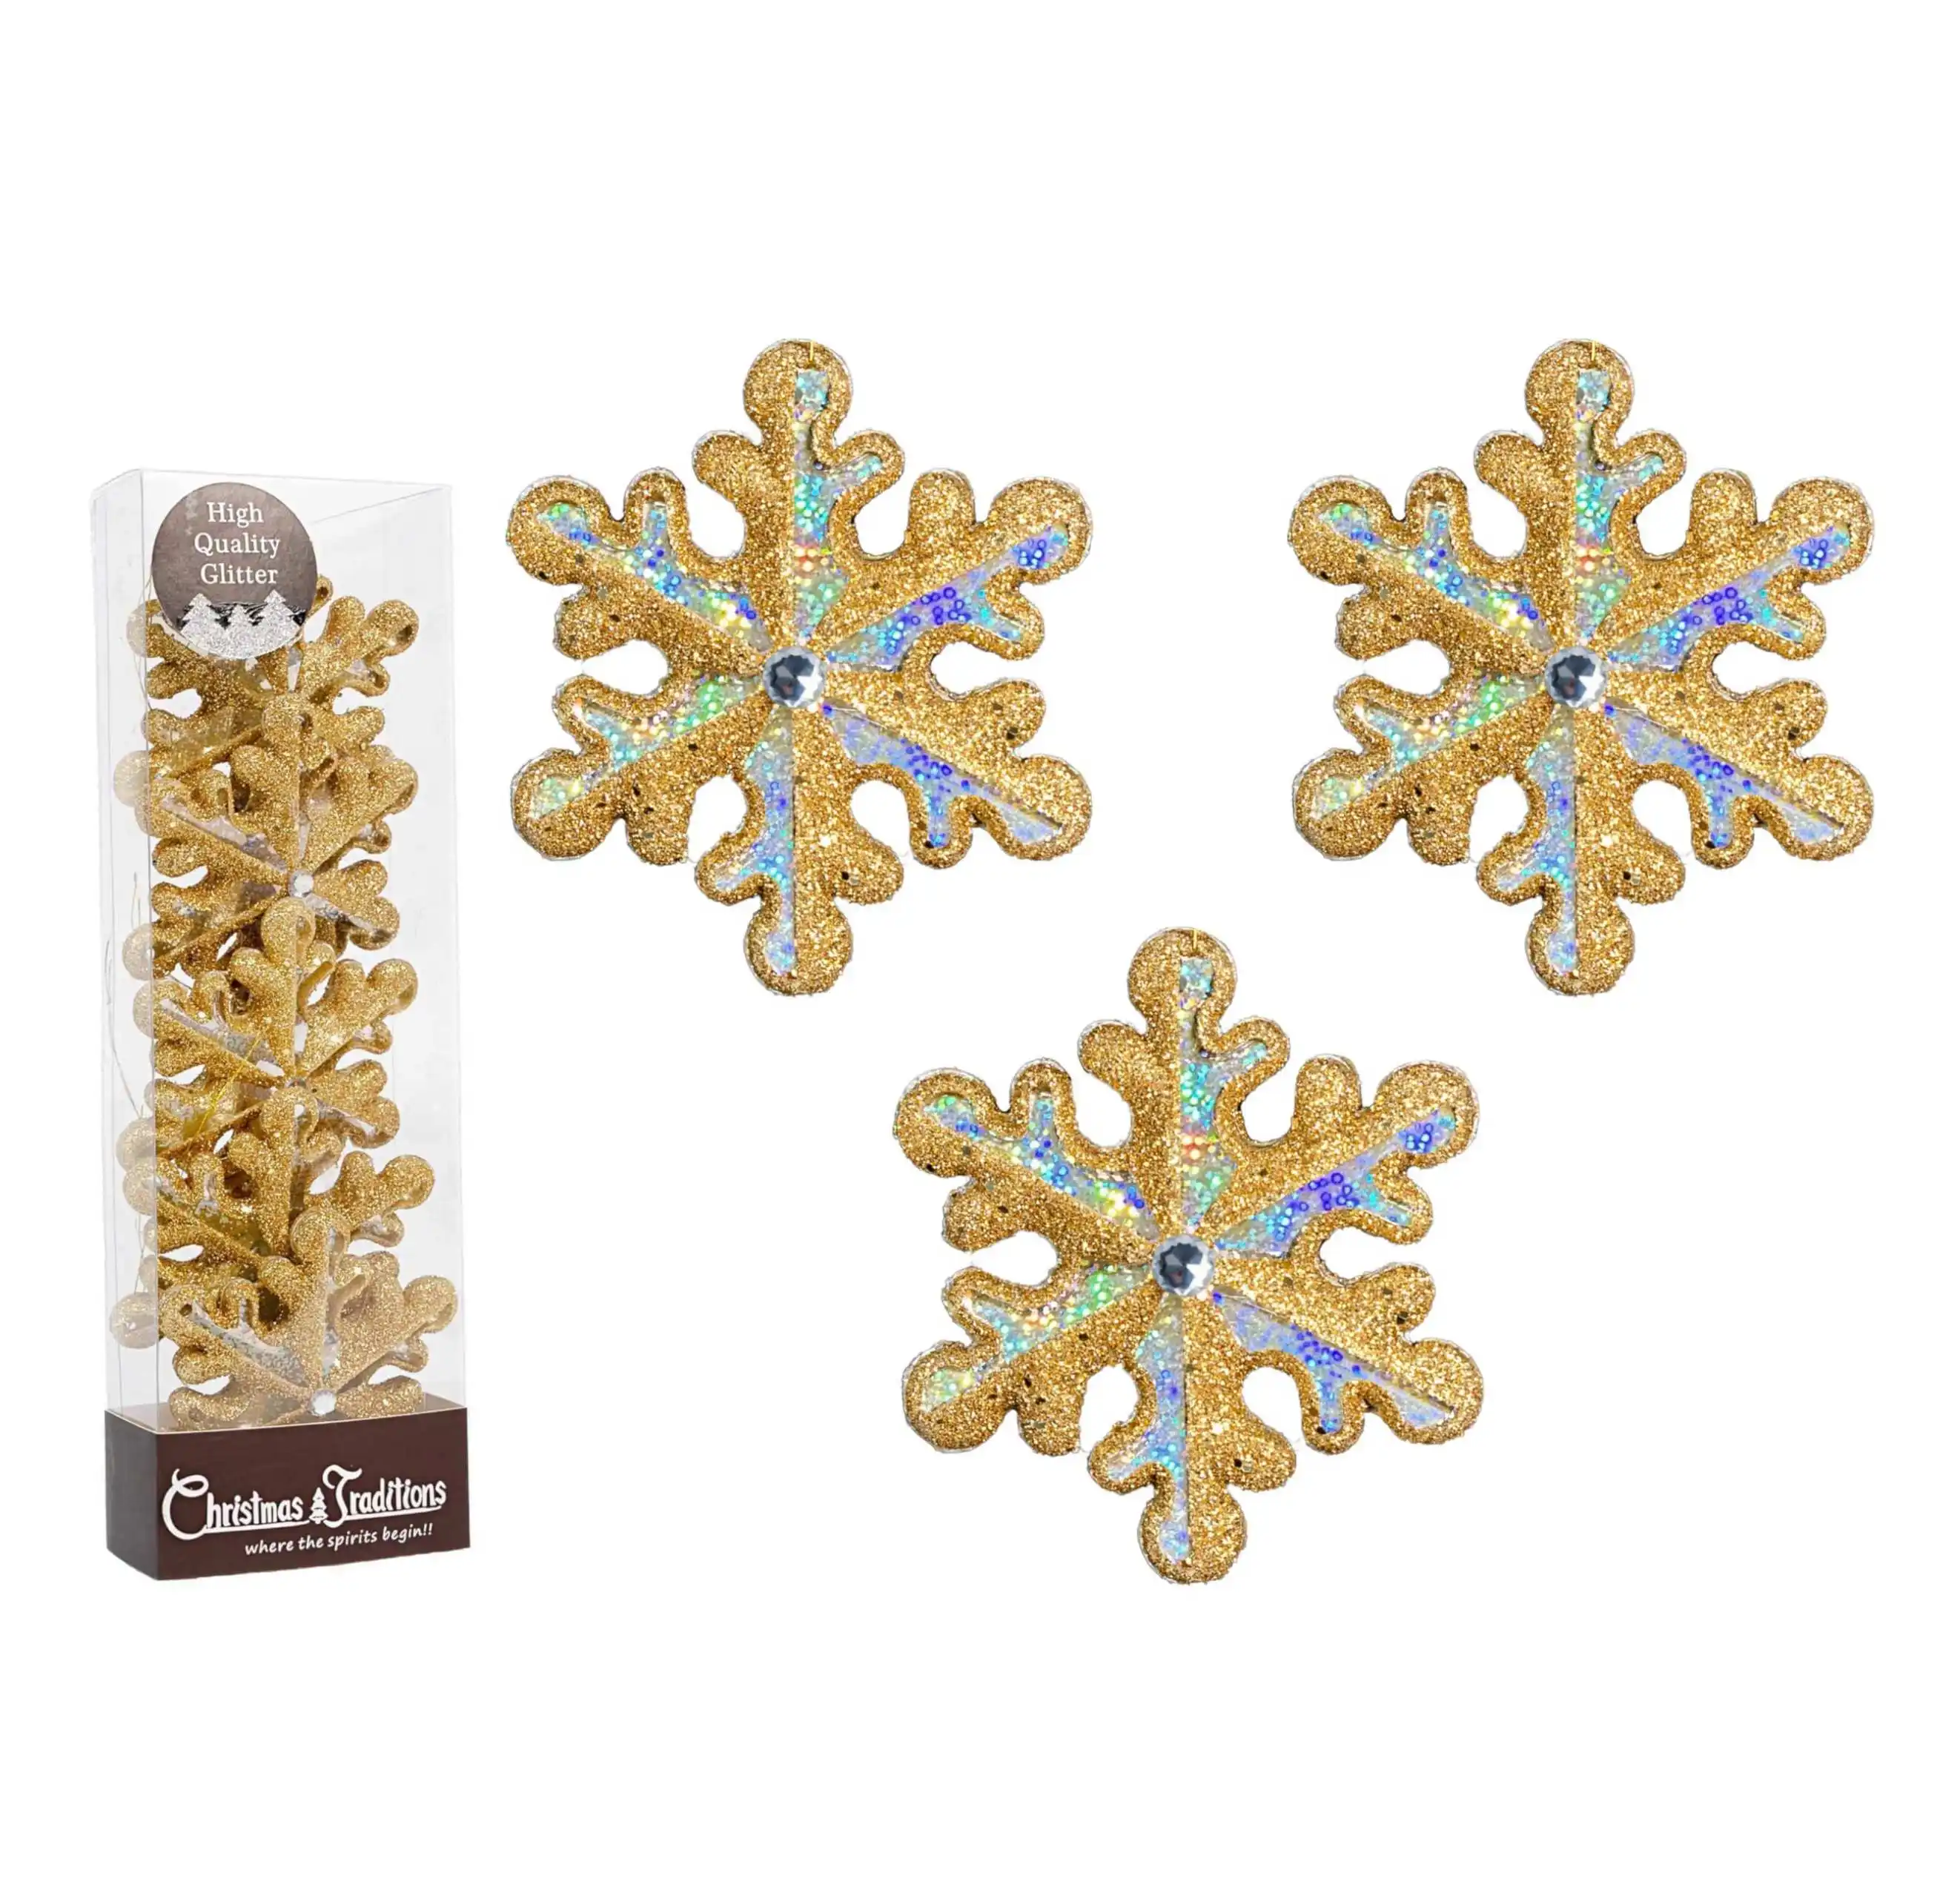 OEM ODM 4 inch Glittered Filigree Snowflake Ornaments Hanging Tree Decorations (Set of 5) (Gold Holographic)